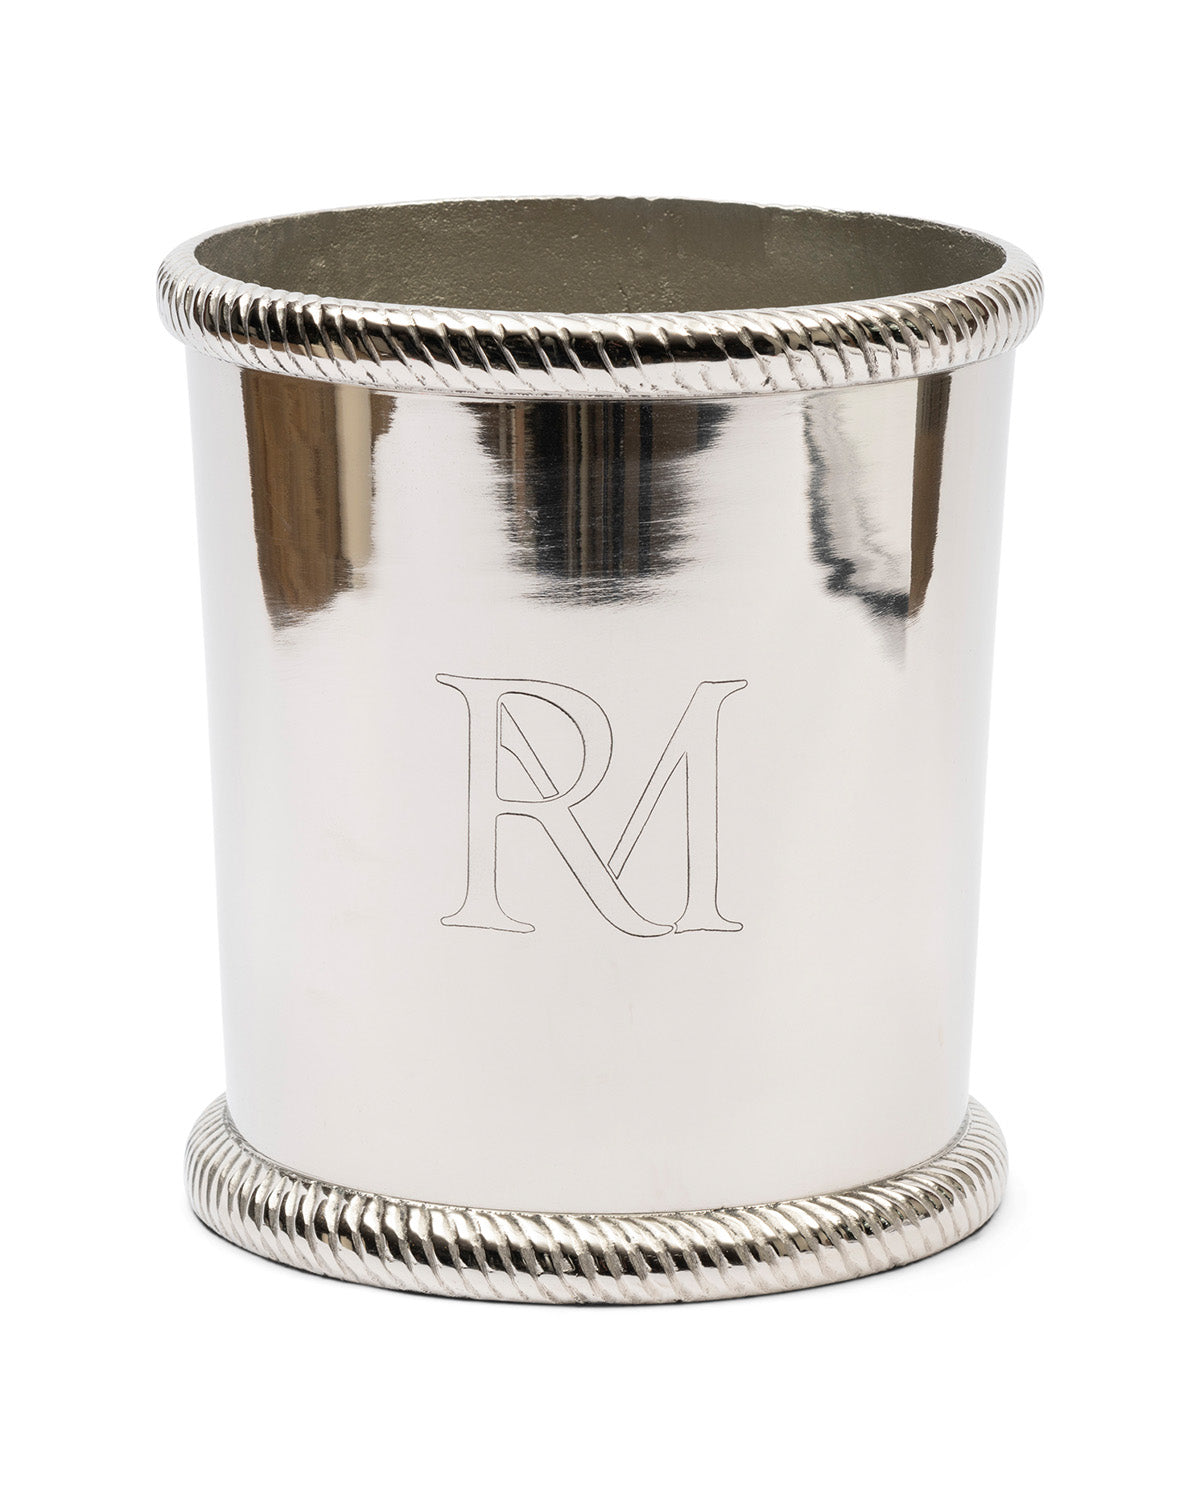 Wine cooler made of silver color aluminum by Riviera Maison